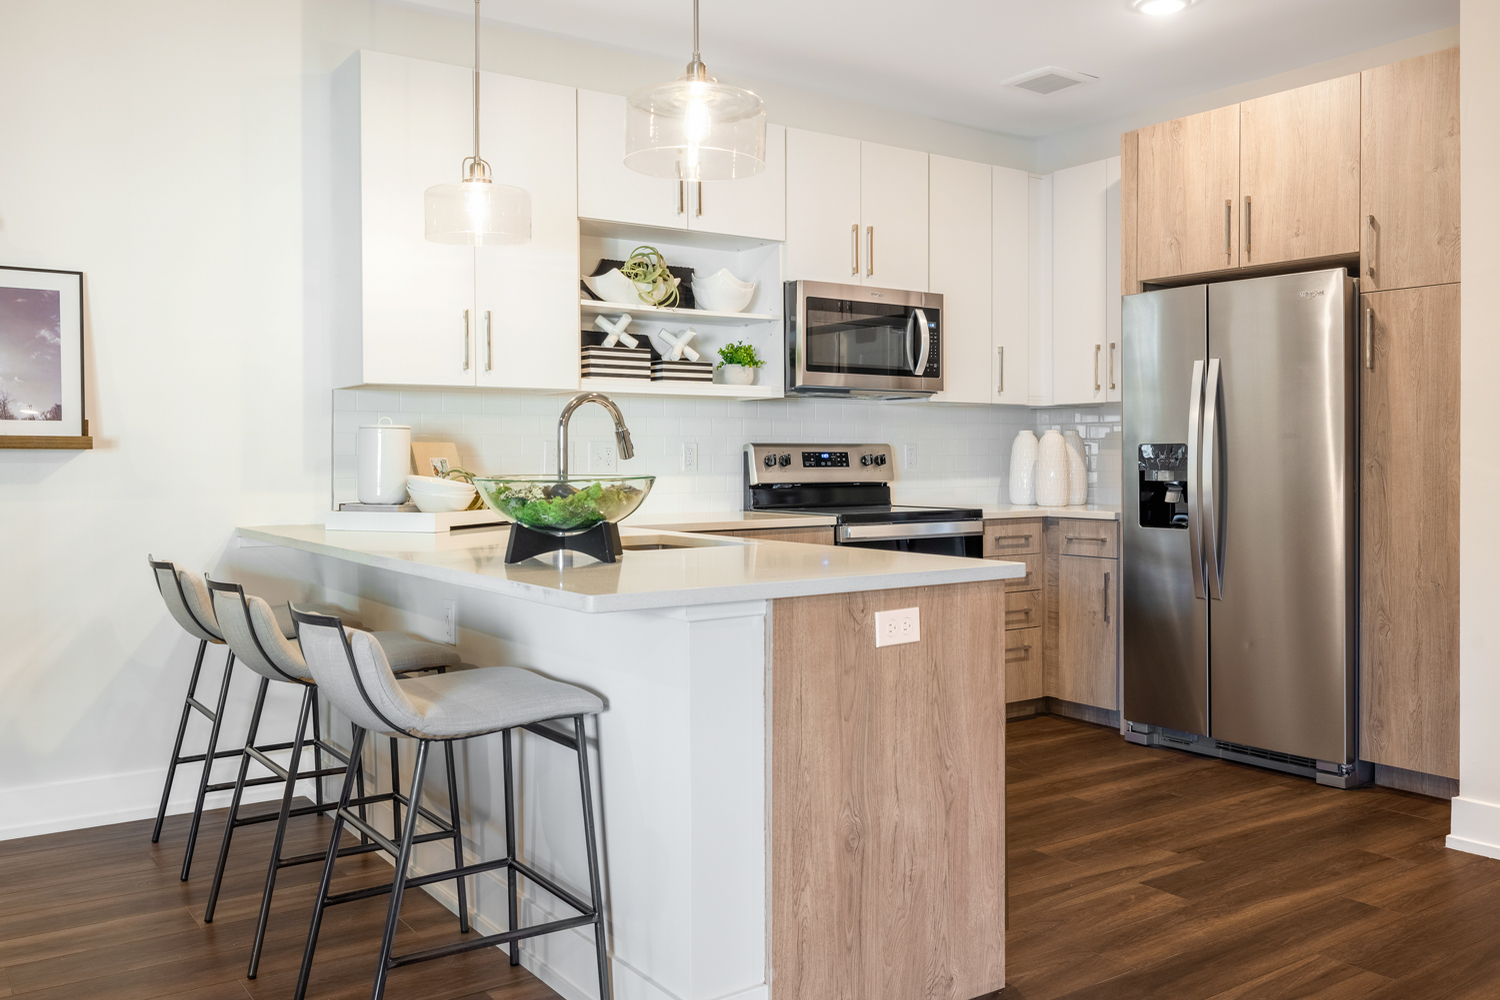 Compass at The Grove : Sleek contemporary cabinetry with modern stainless steel appliances